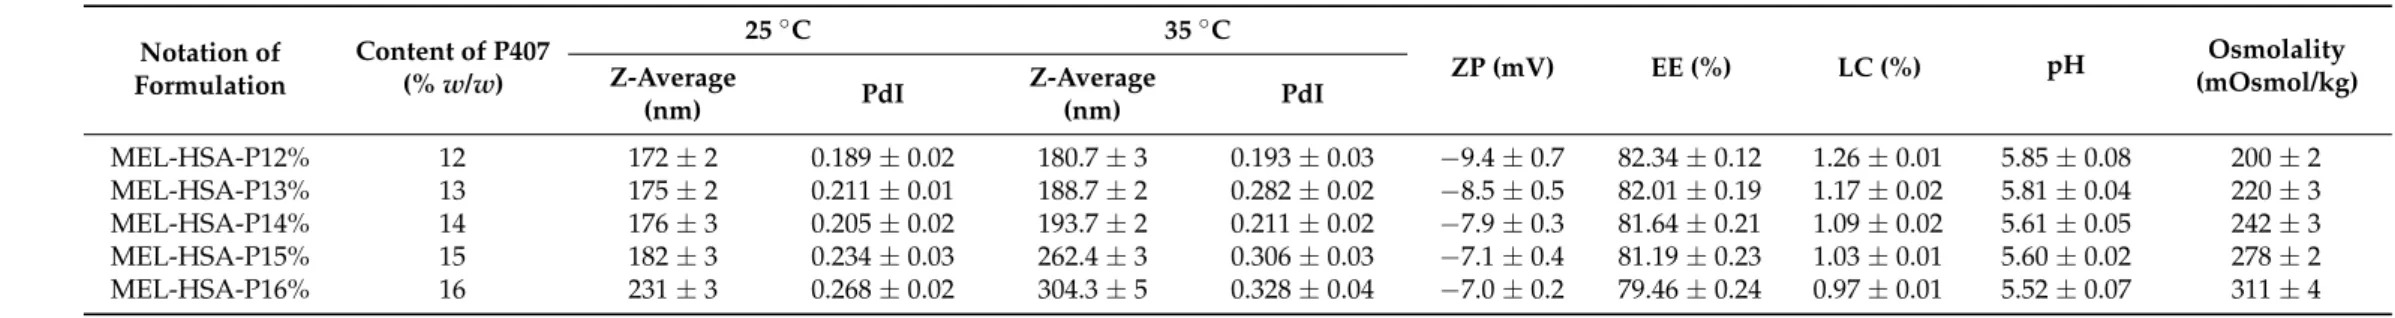 Table 2. Physico-chemical parameters of in situ thermogelling nasal formulations.